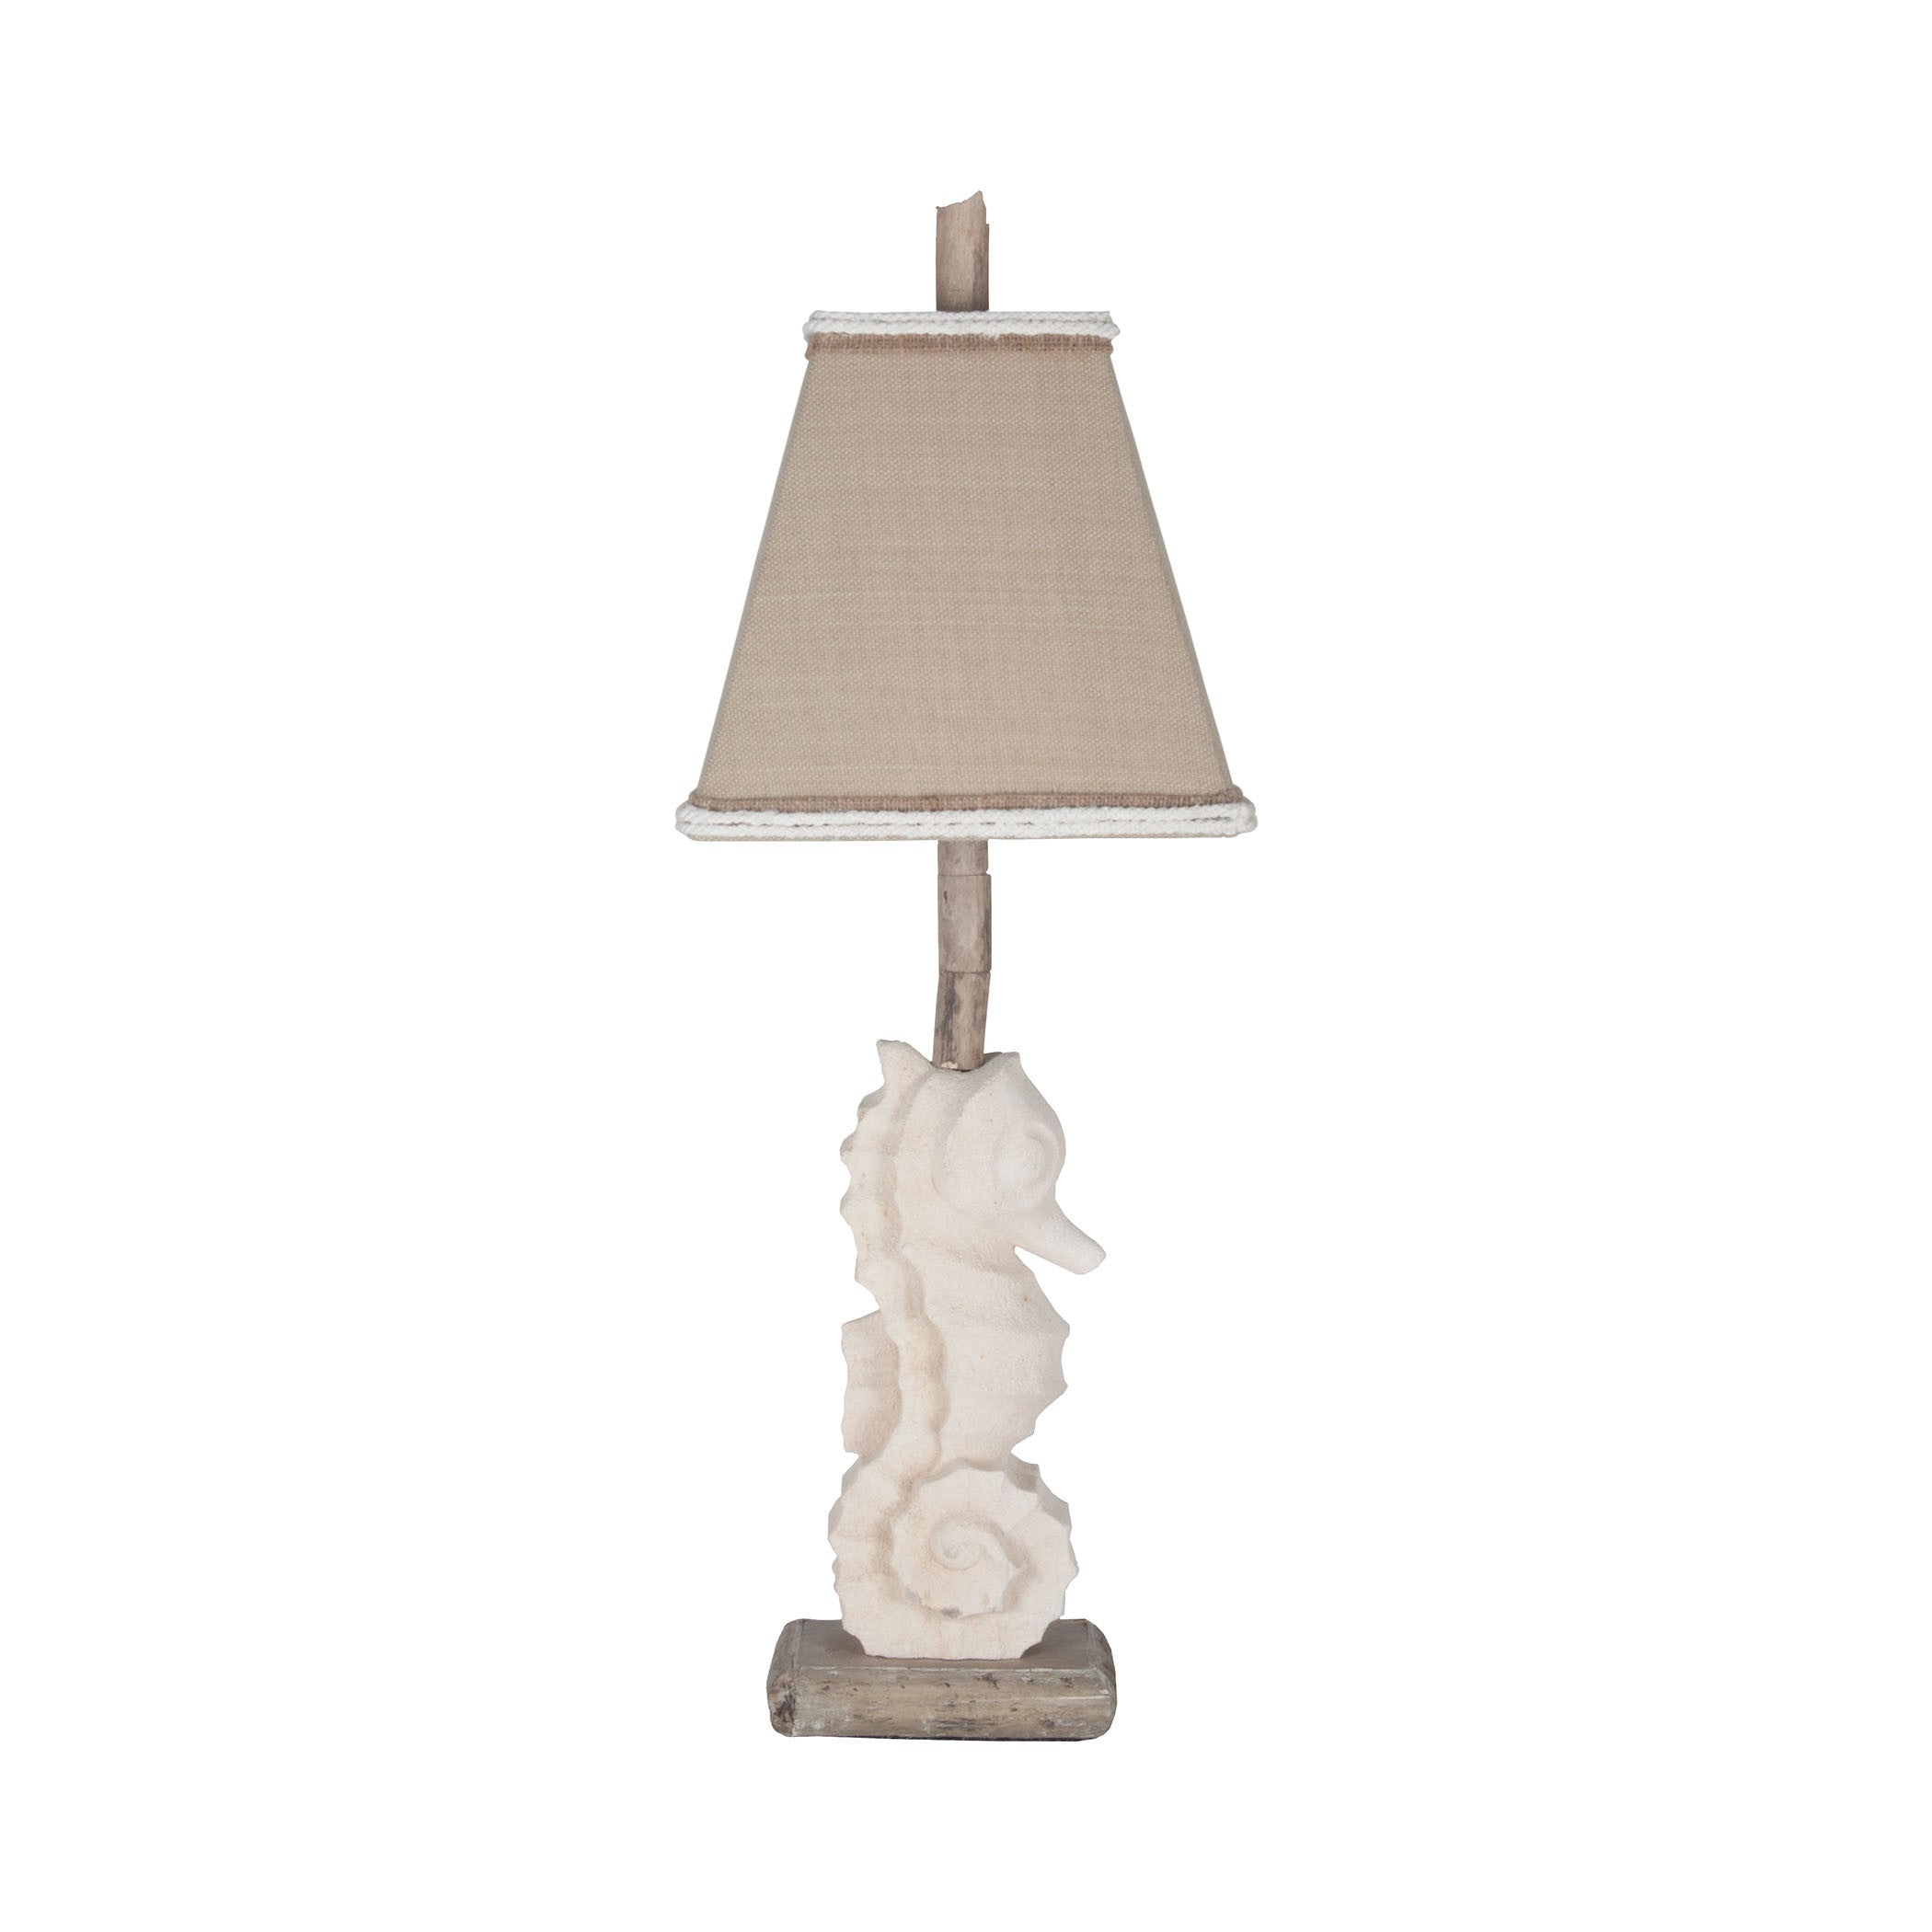 Guildmaster Gui-3516013 Stone Seahorse Collection Aged Stone Finish Table Lamp